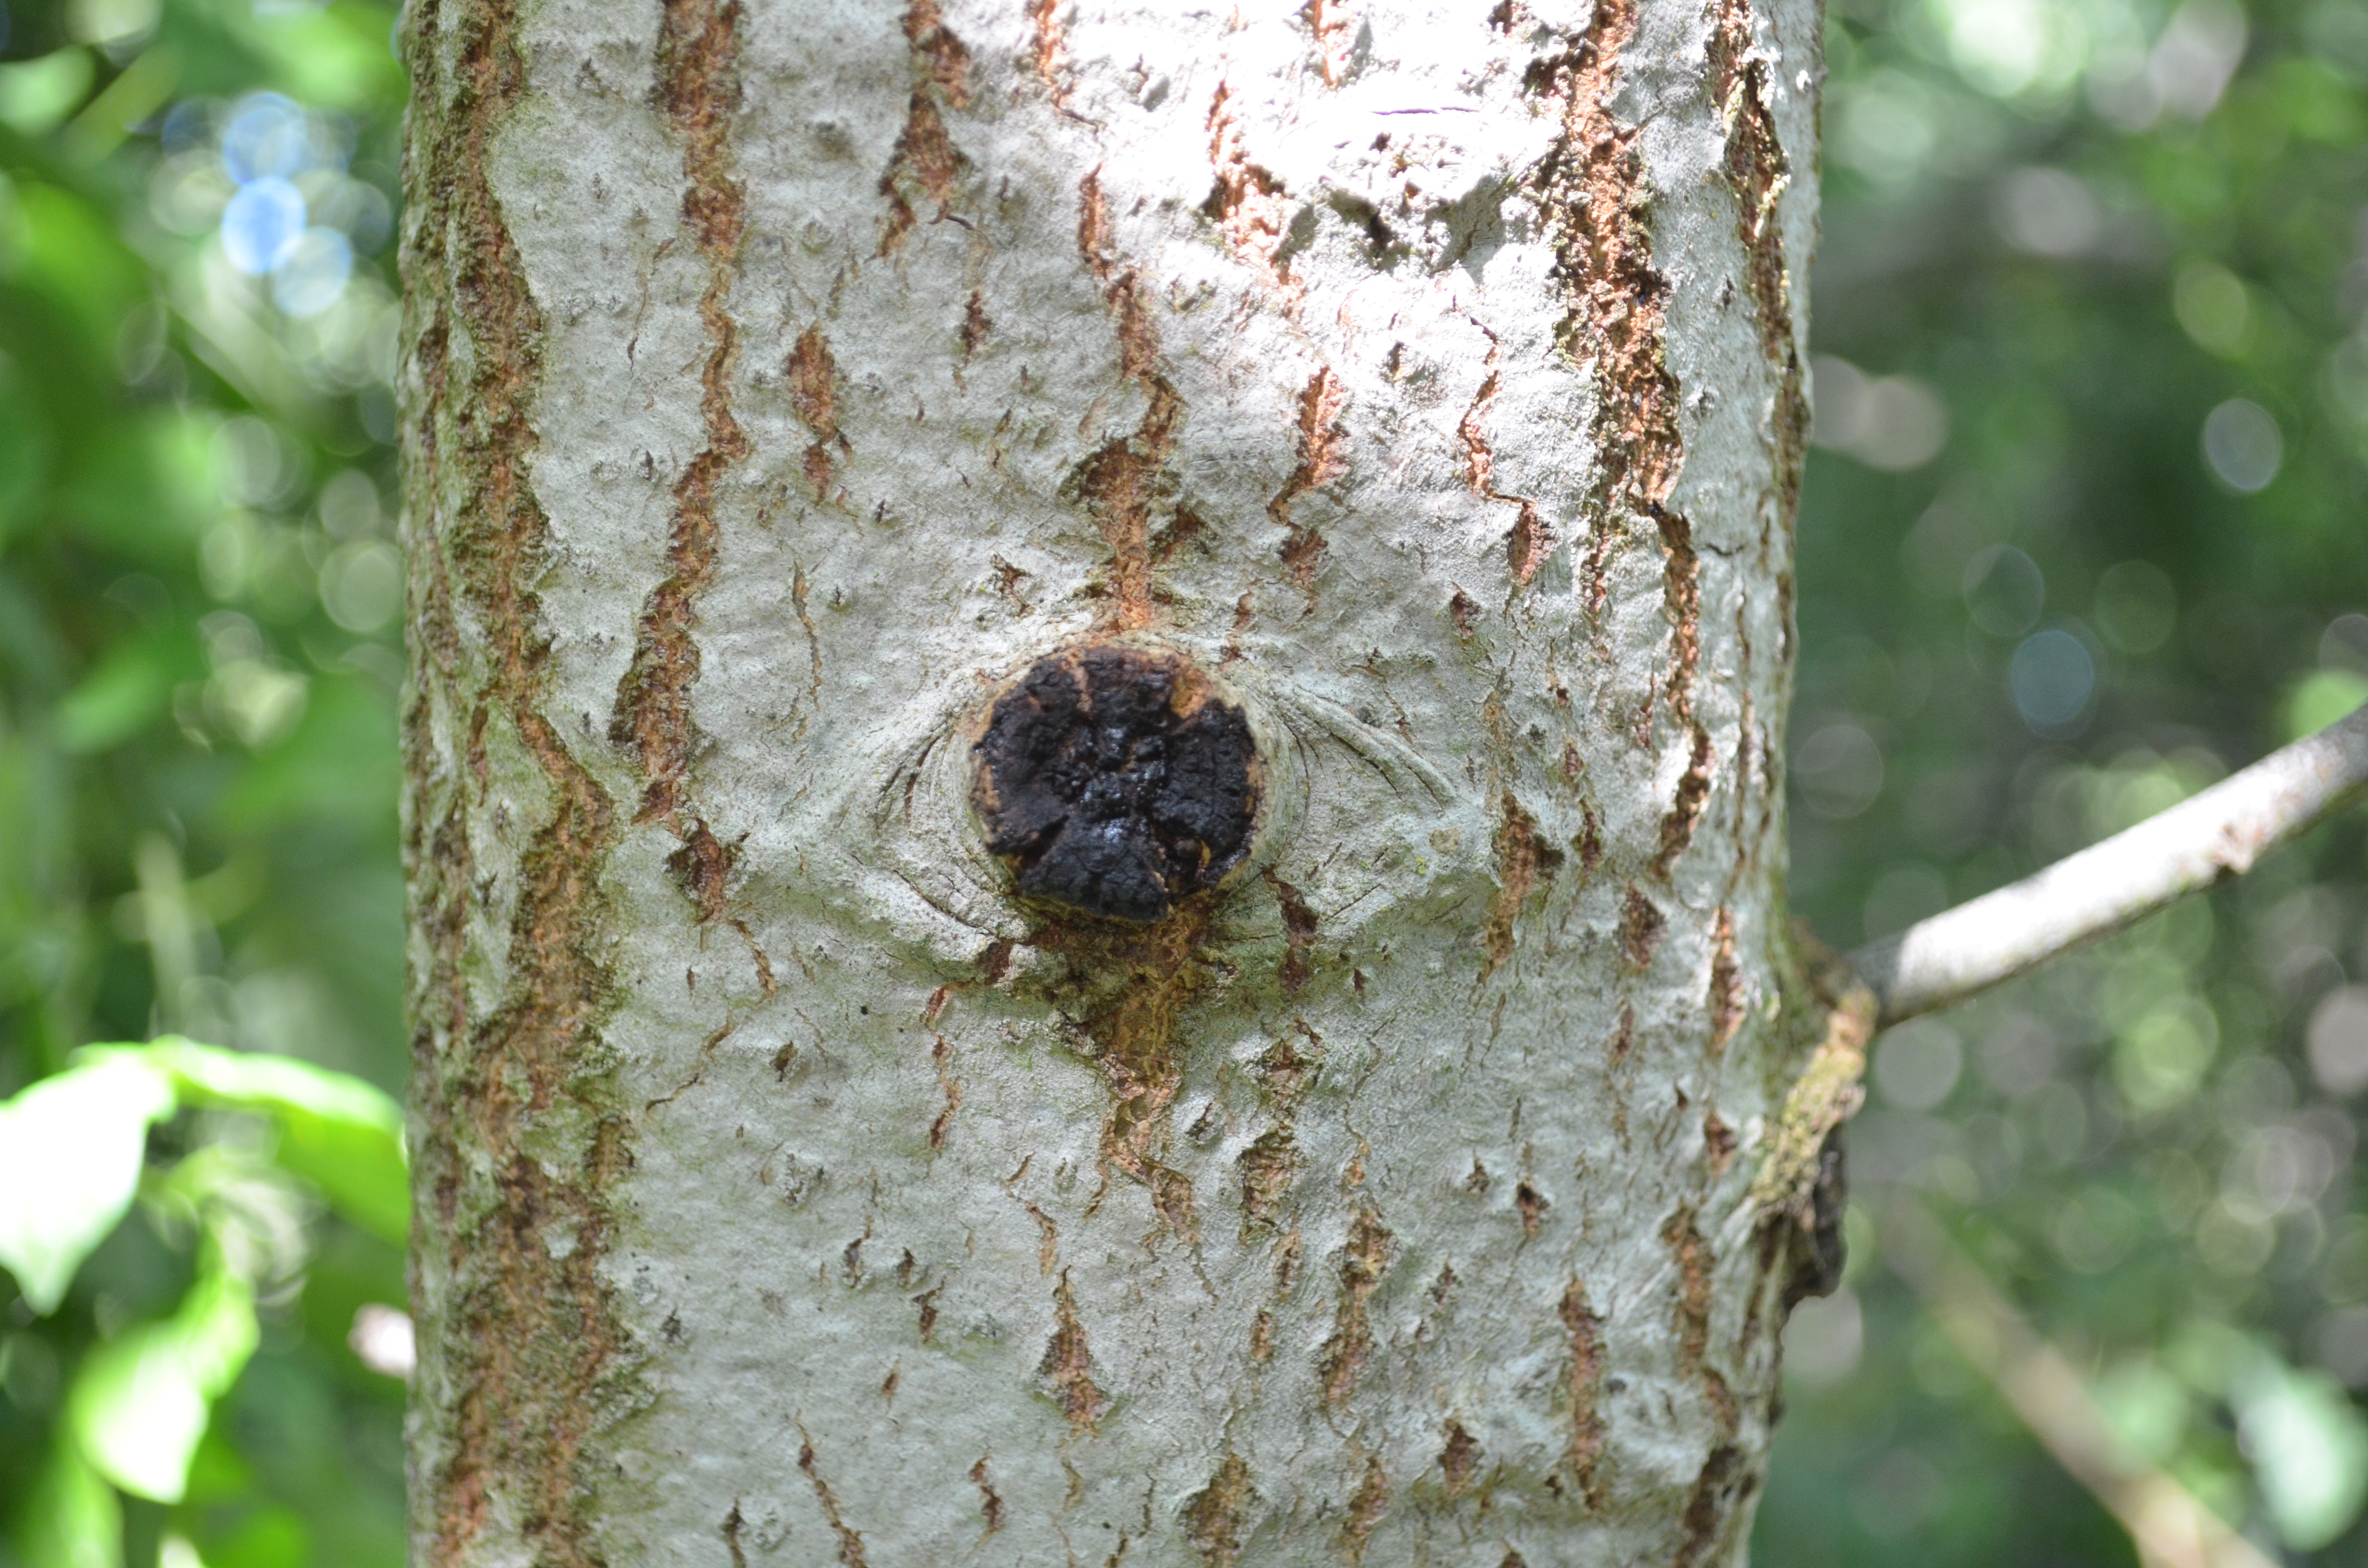 Close up of the bark of an aspen tree with a mark that looks like an eye.